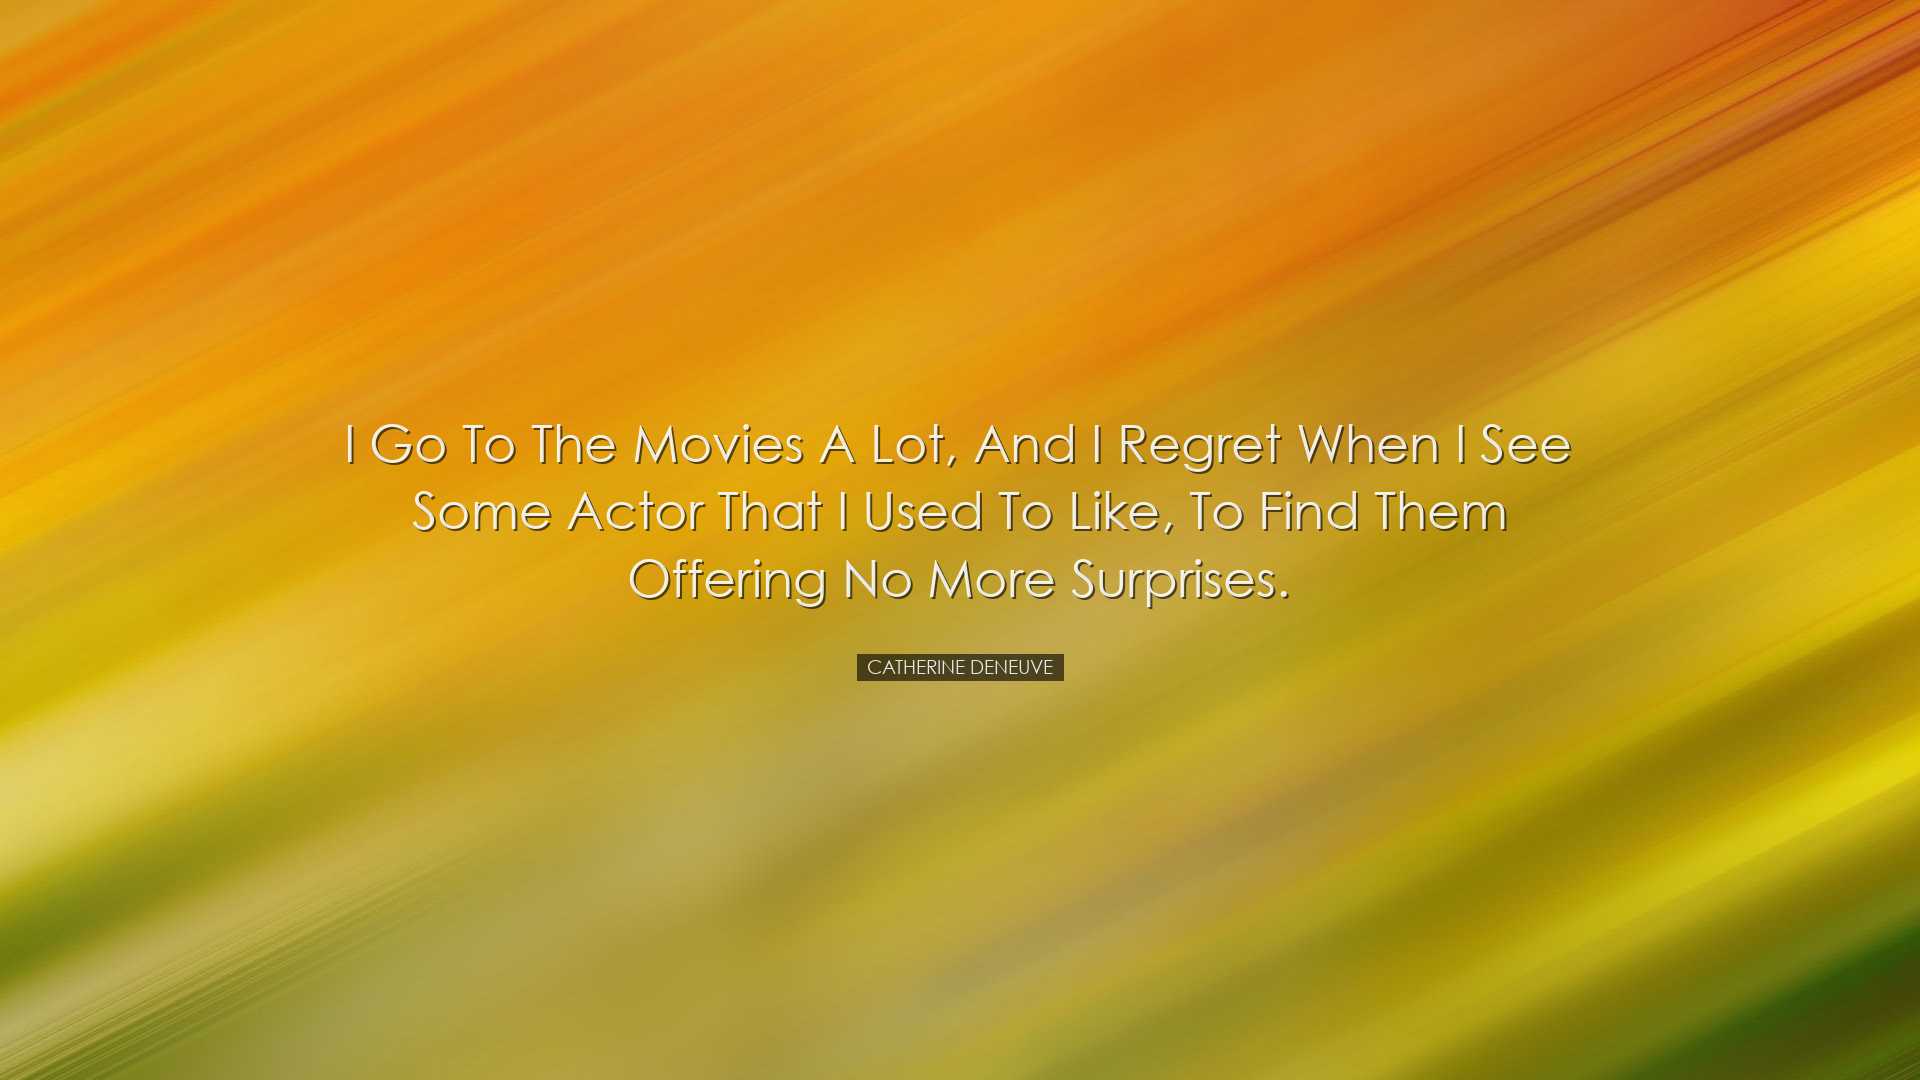 I go to the movies a lot, and I regret when I see some actor that